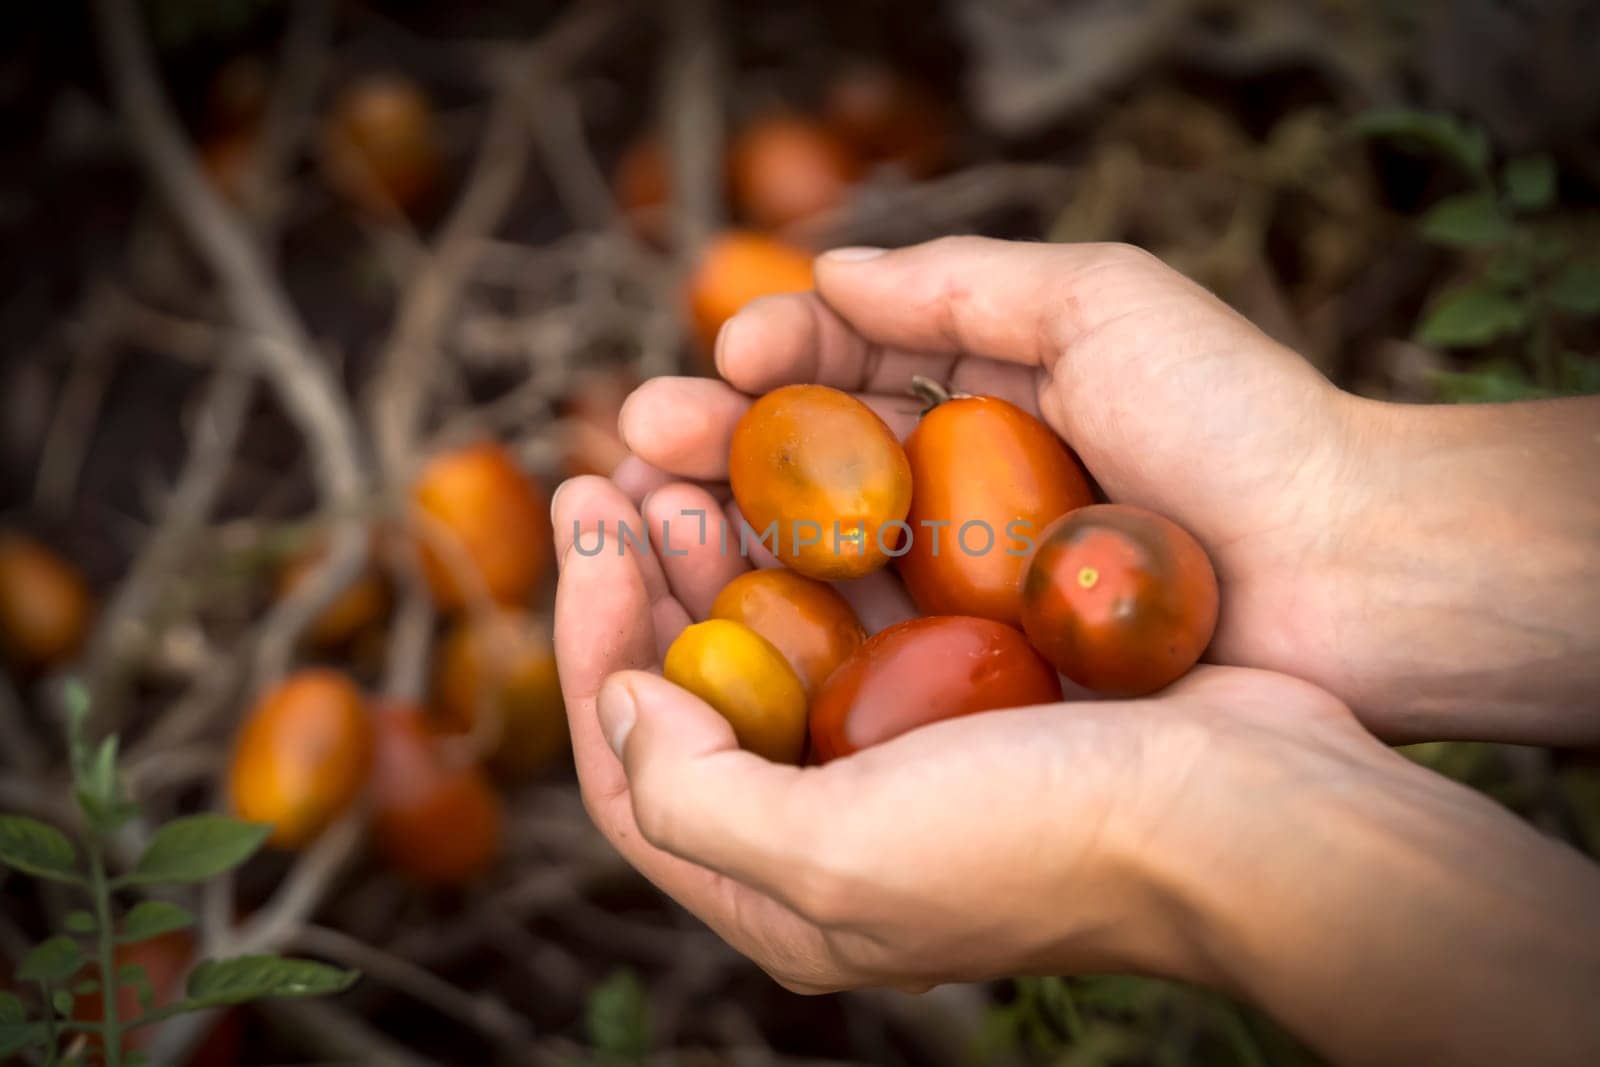 Female hands hold harvested tomatoes from a vegetable garden. by africapink